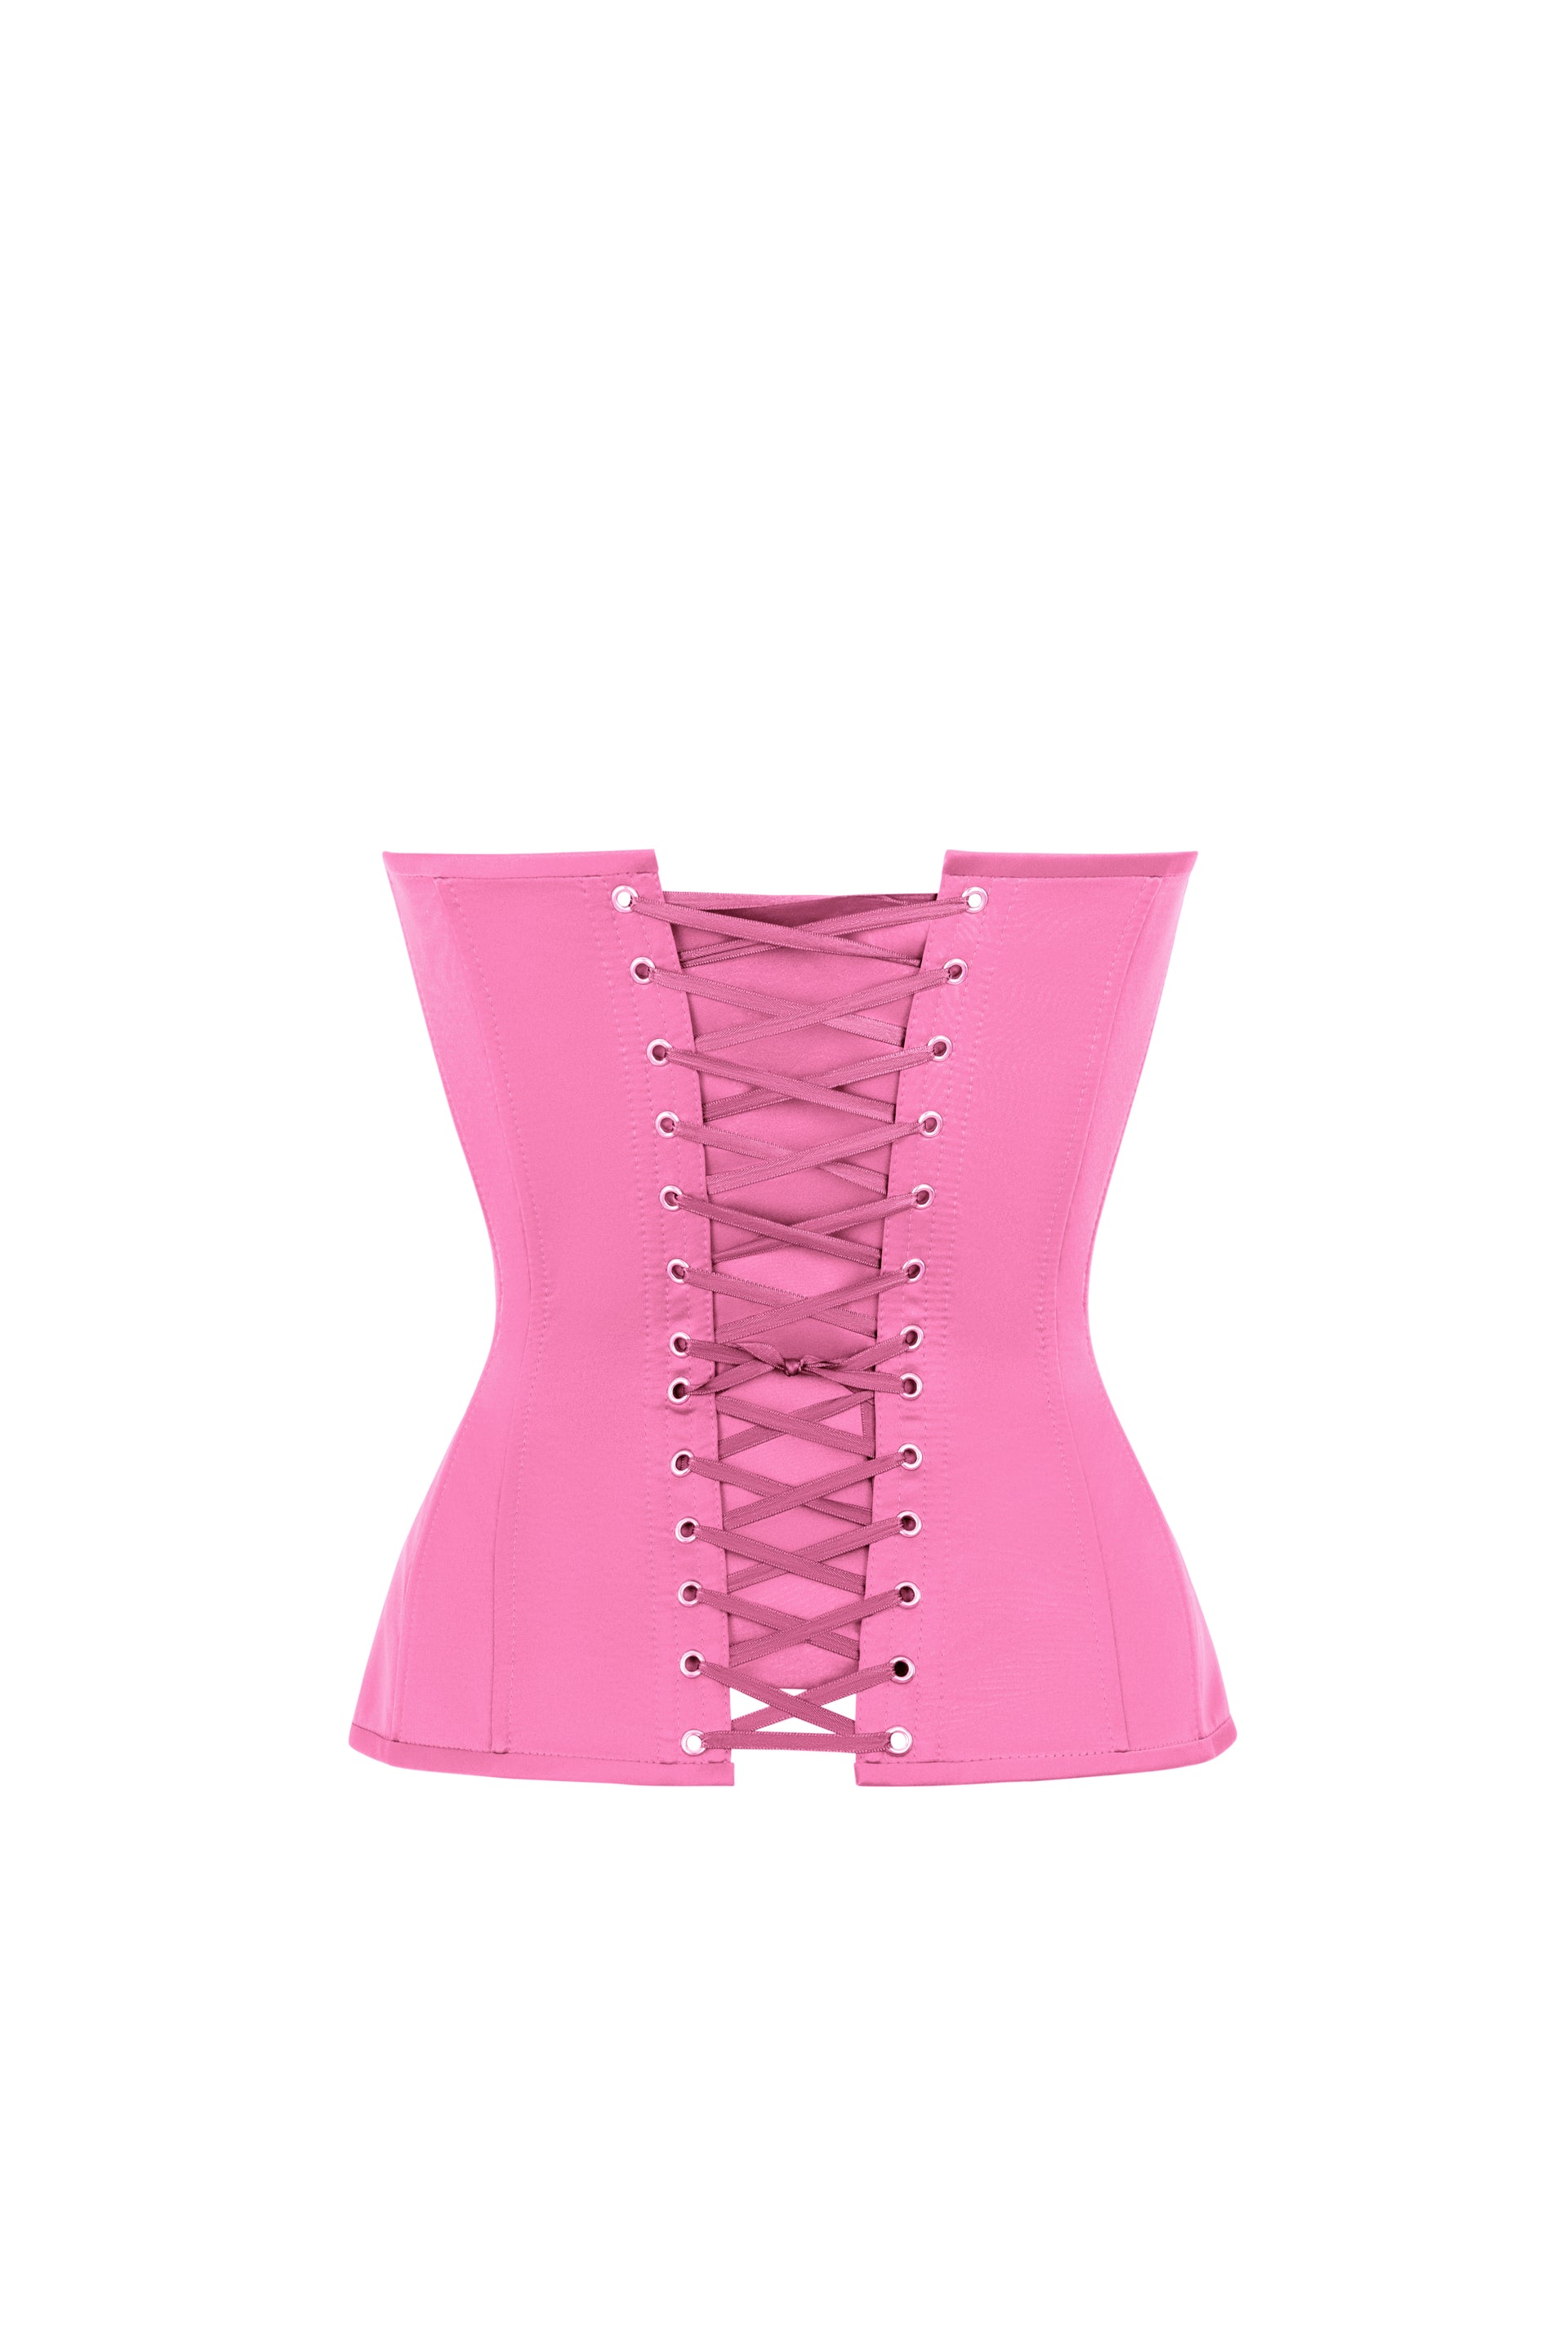 Pink satin corset with cups